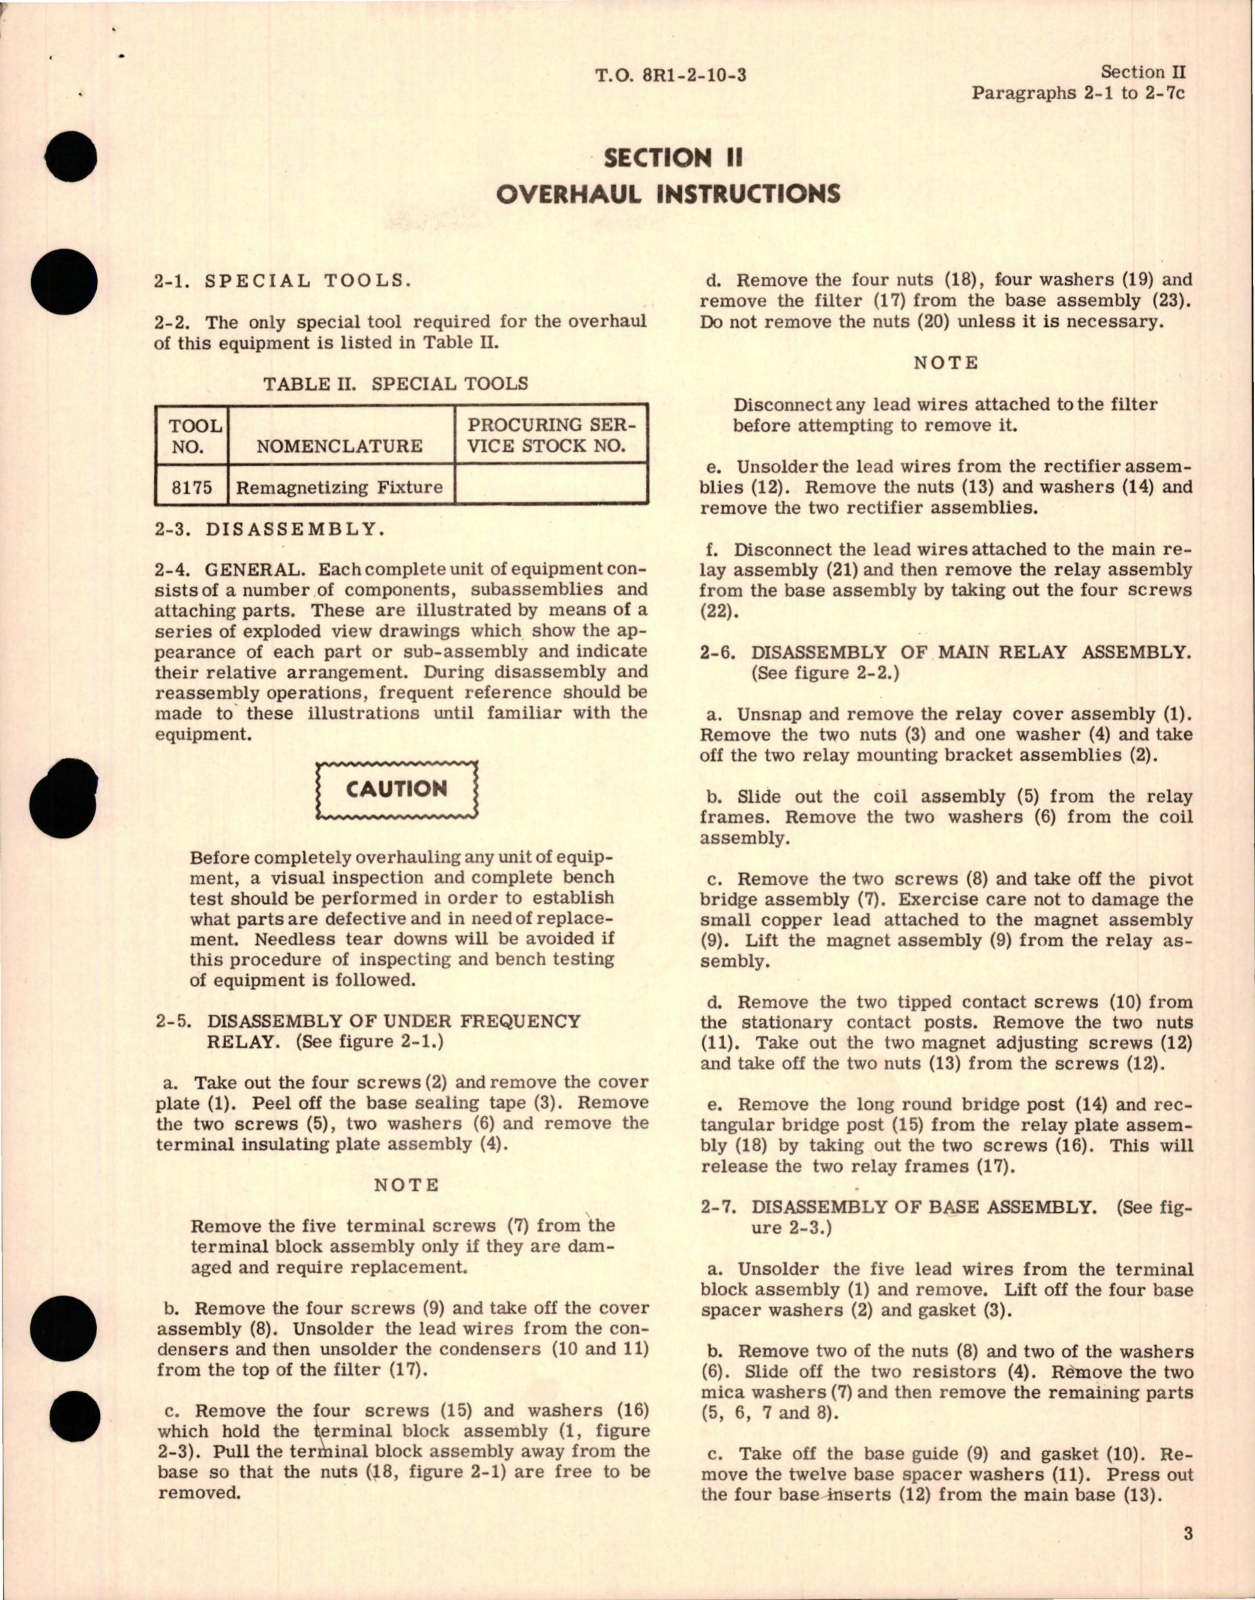 Sample page 7 from AirCorps Library document: Overhaul Manual for Frequency Relay